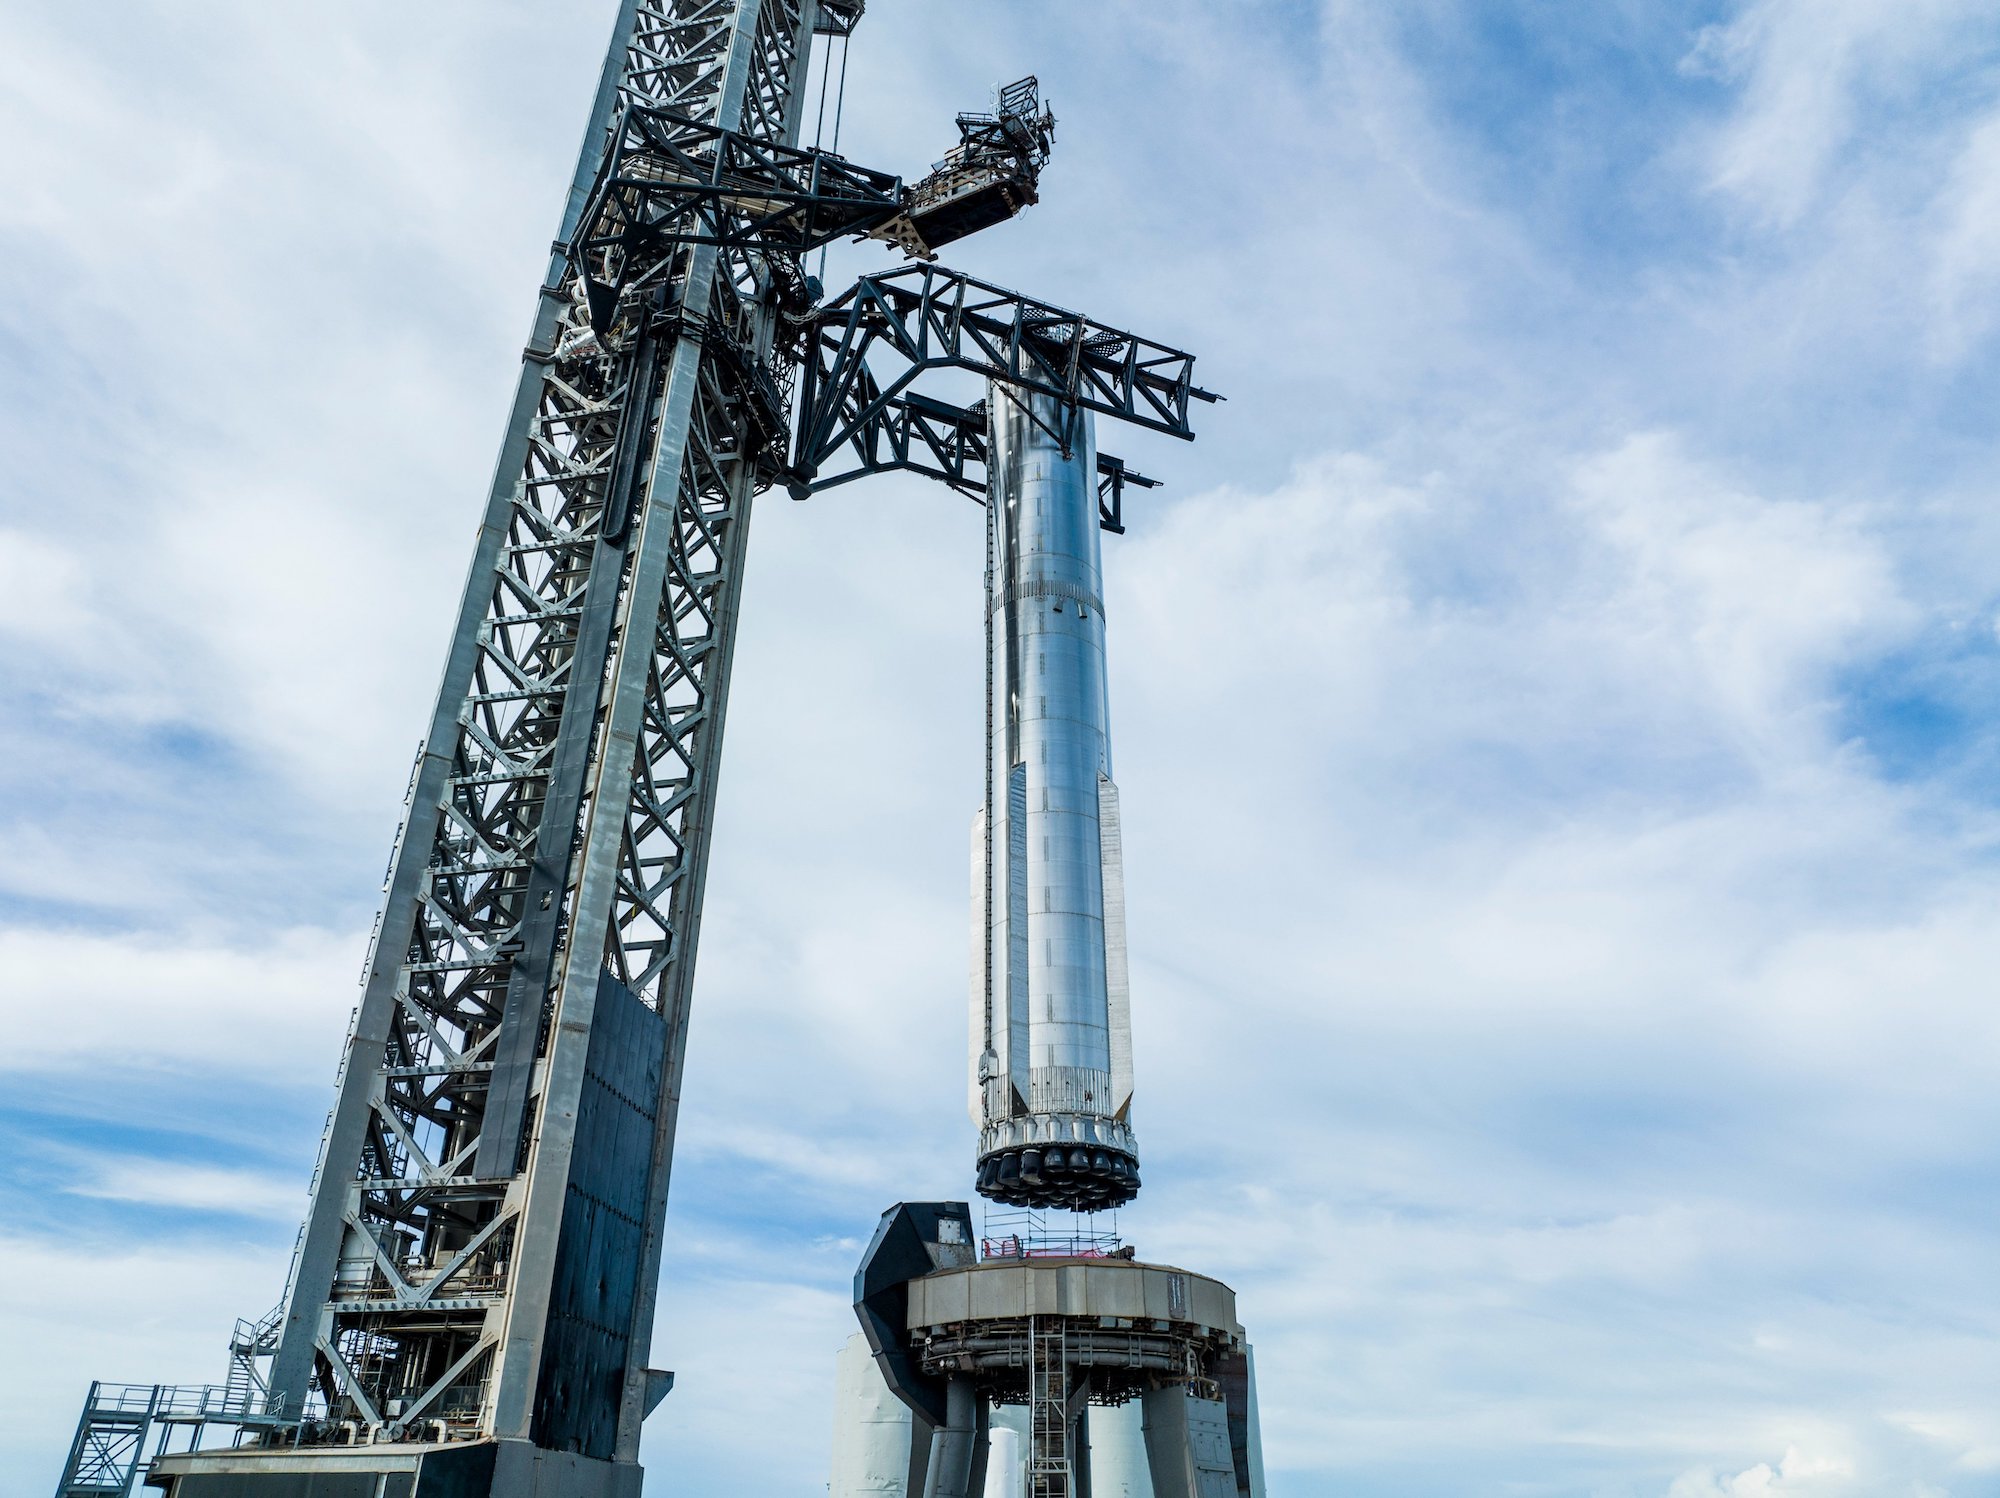 SpaceX's Super Heavy on the launchpad ahead of a test.